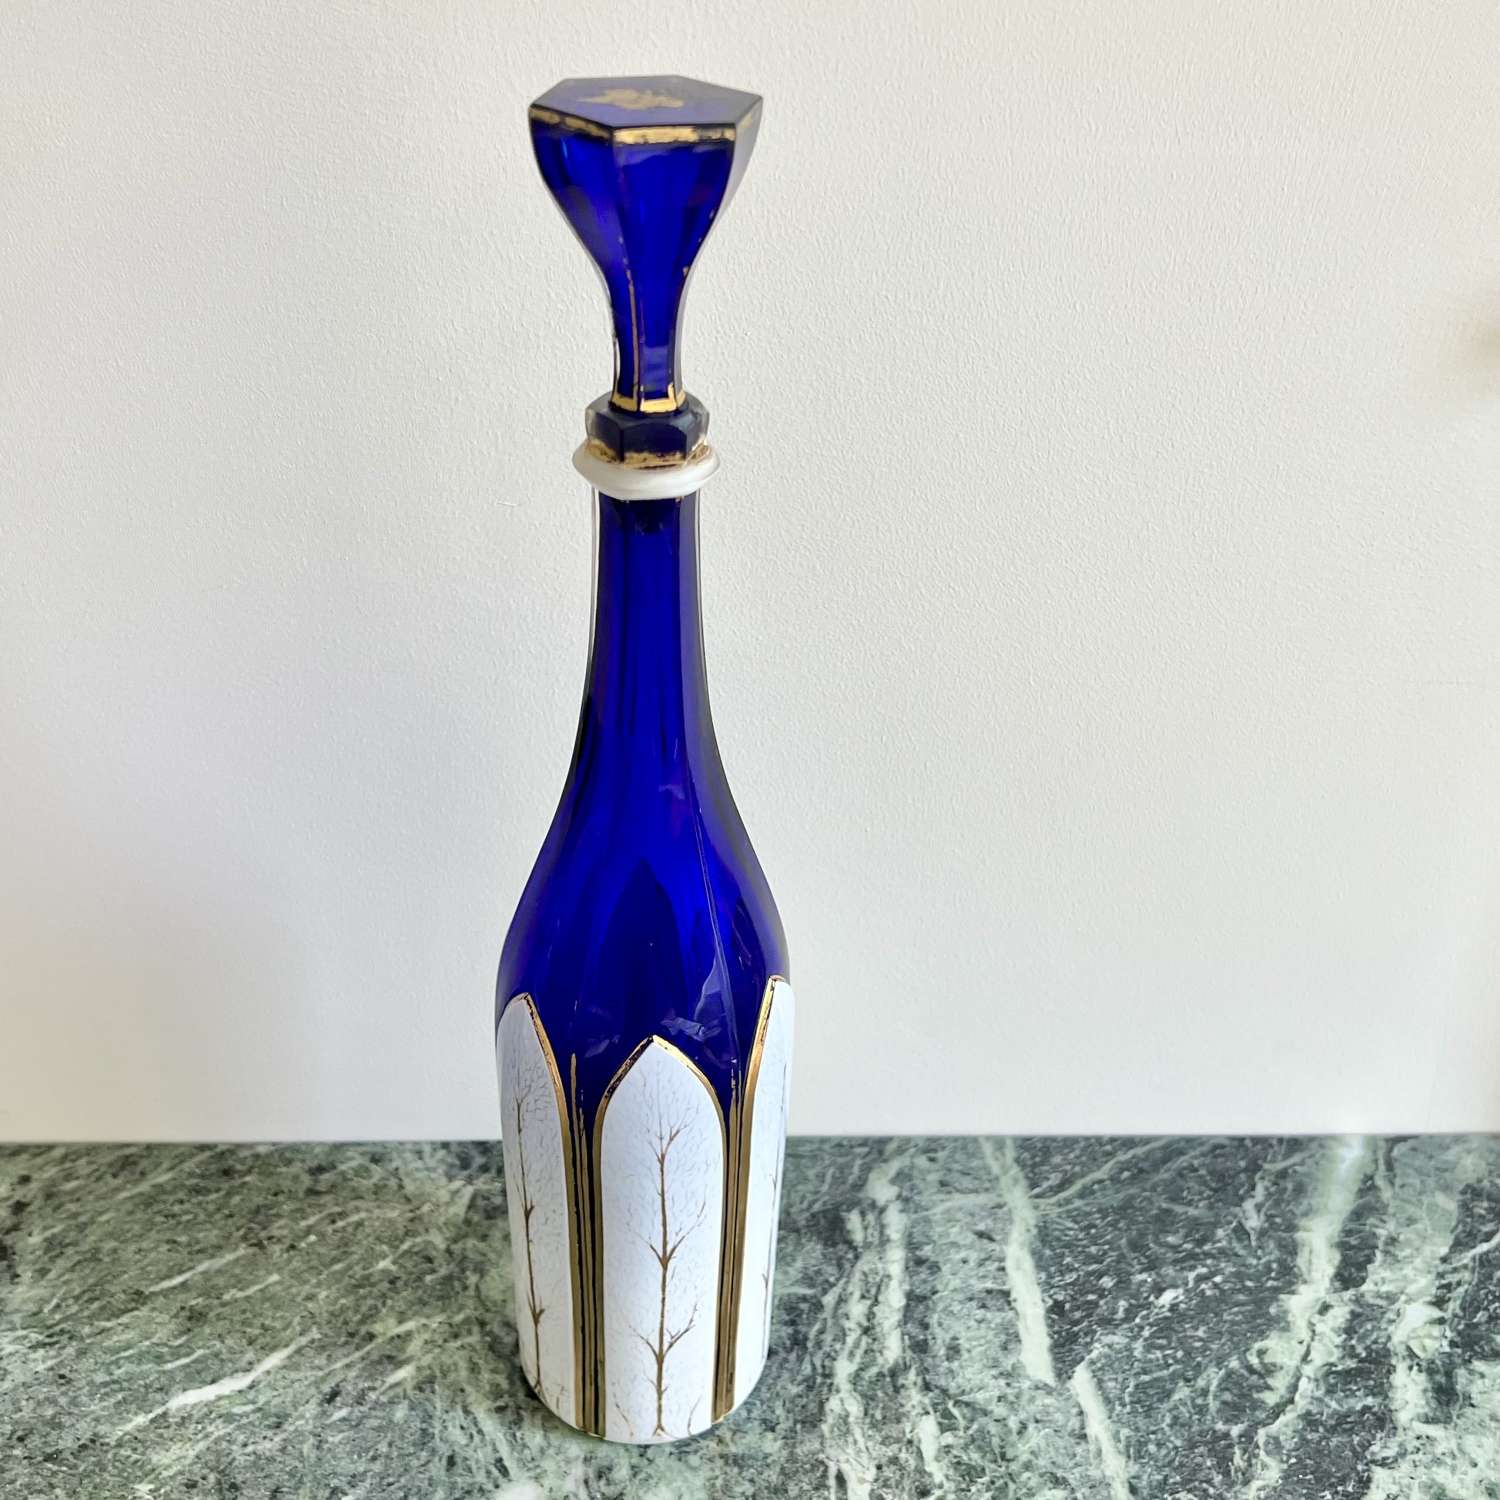 Early Victorian gilded and overlaid cobalt glass decanter